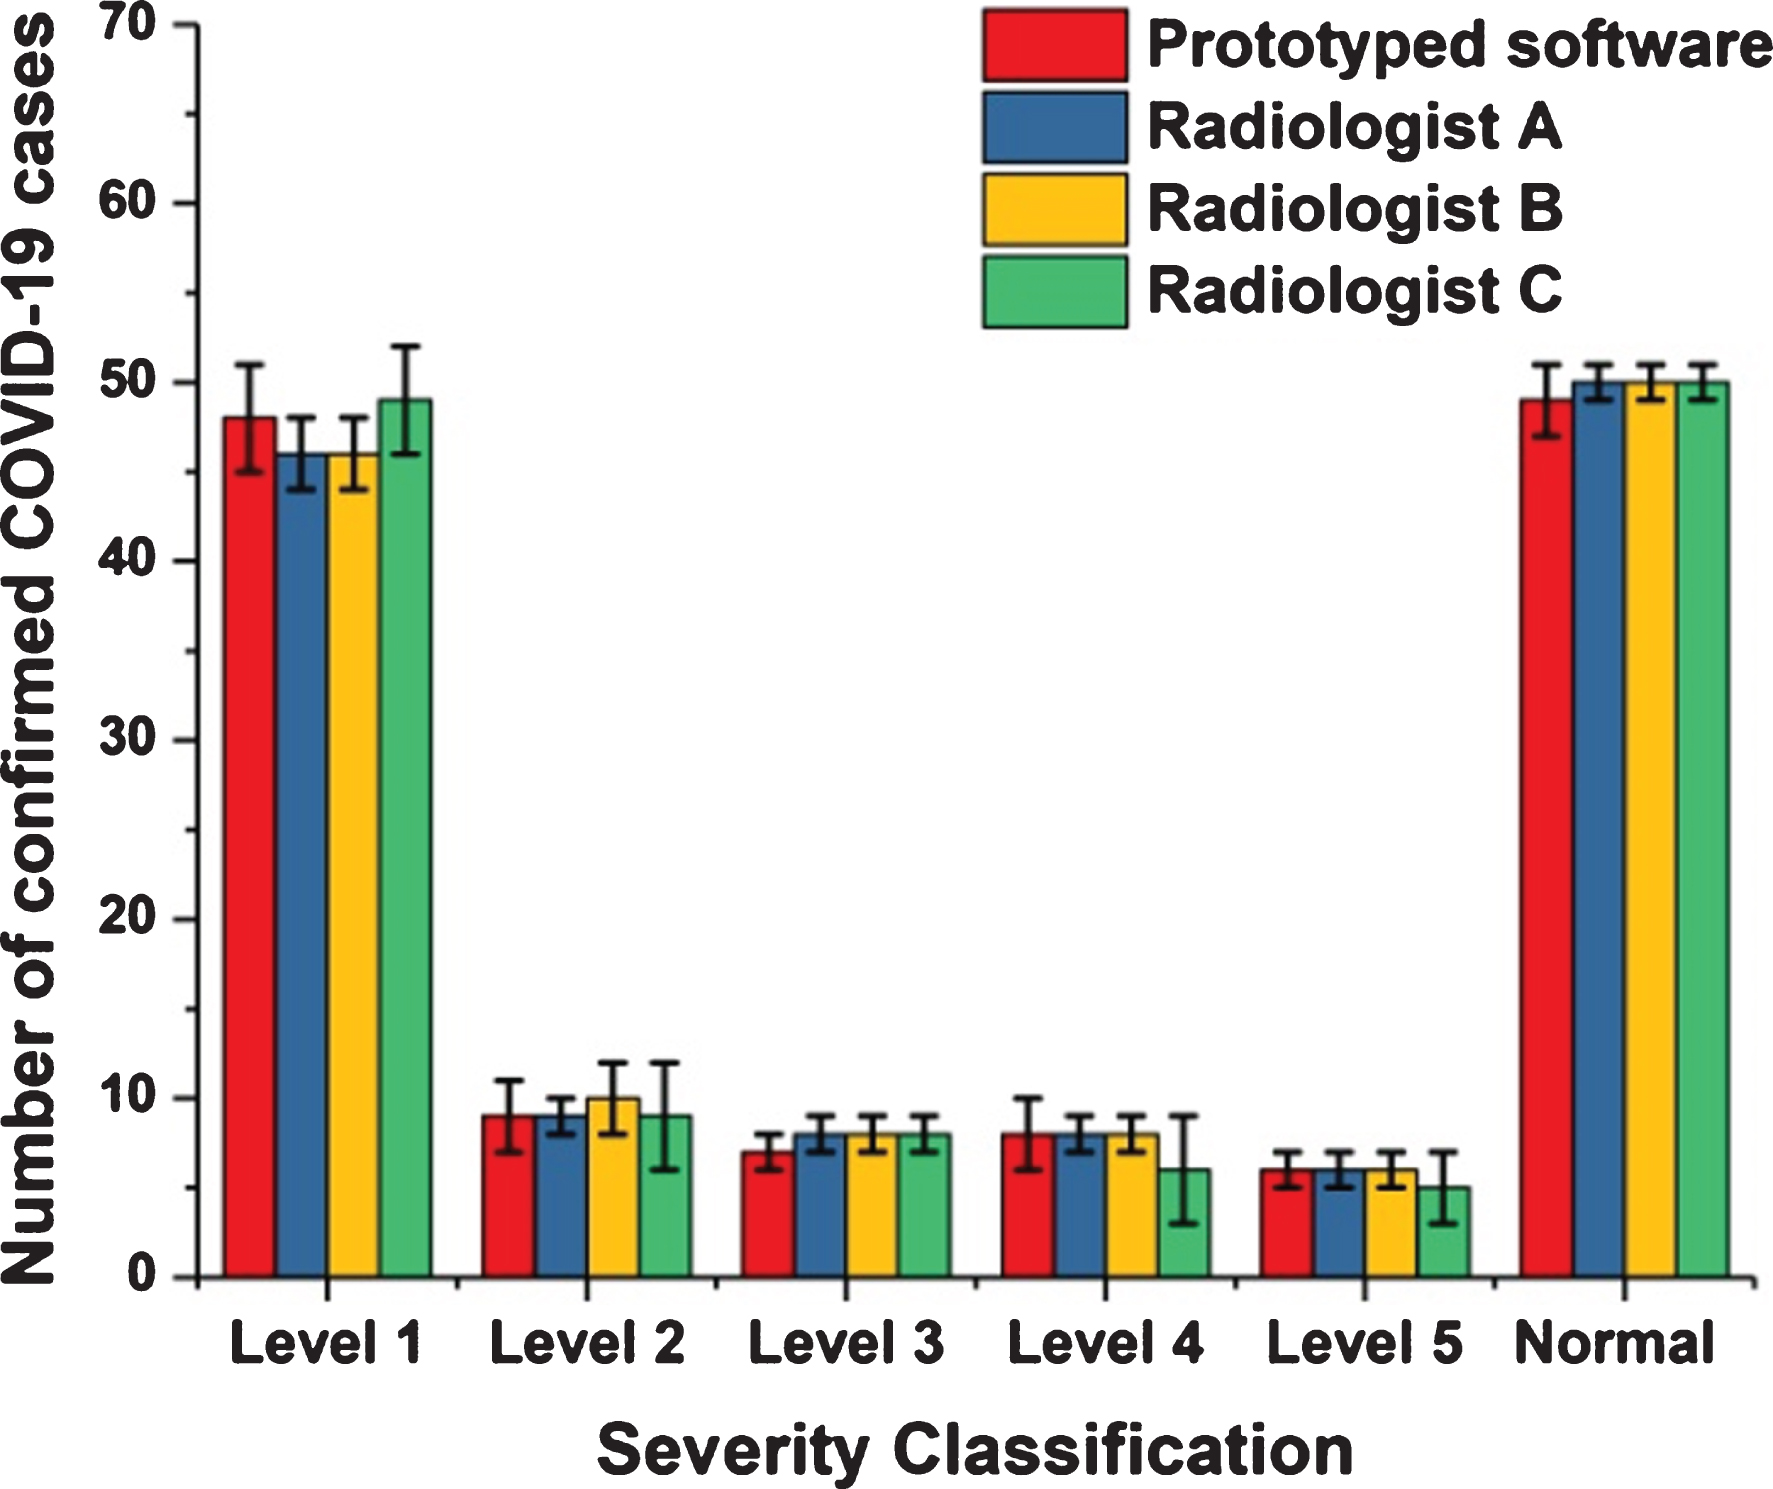 Comparisons between the output of the proposed prototyped software and the views of three radiologists.